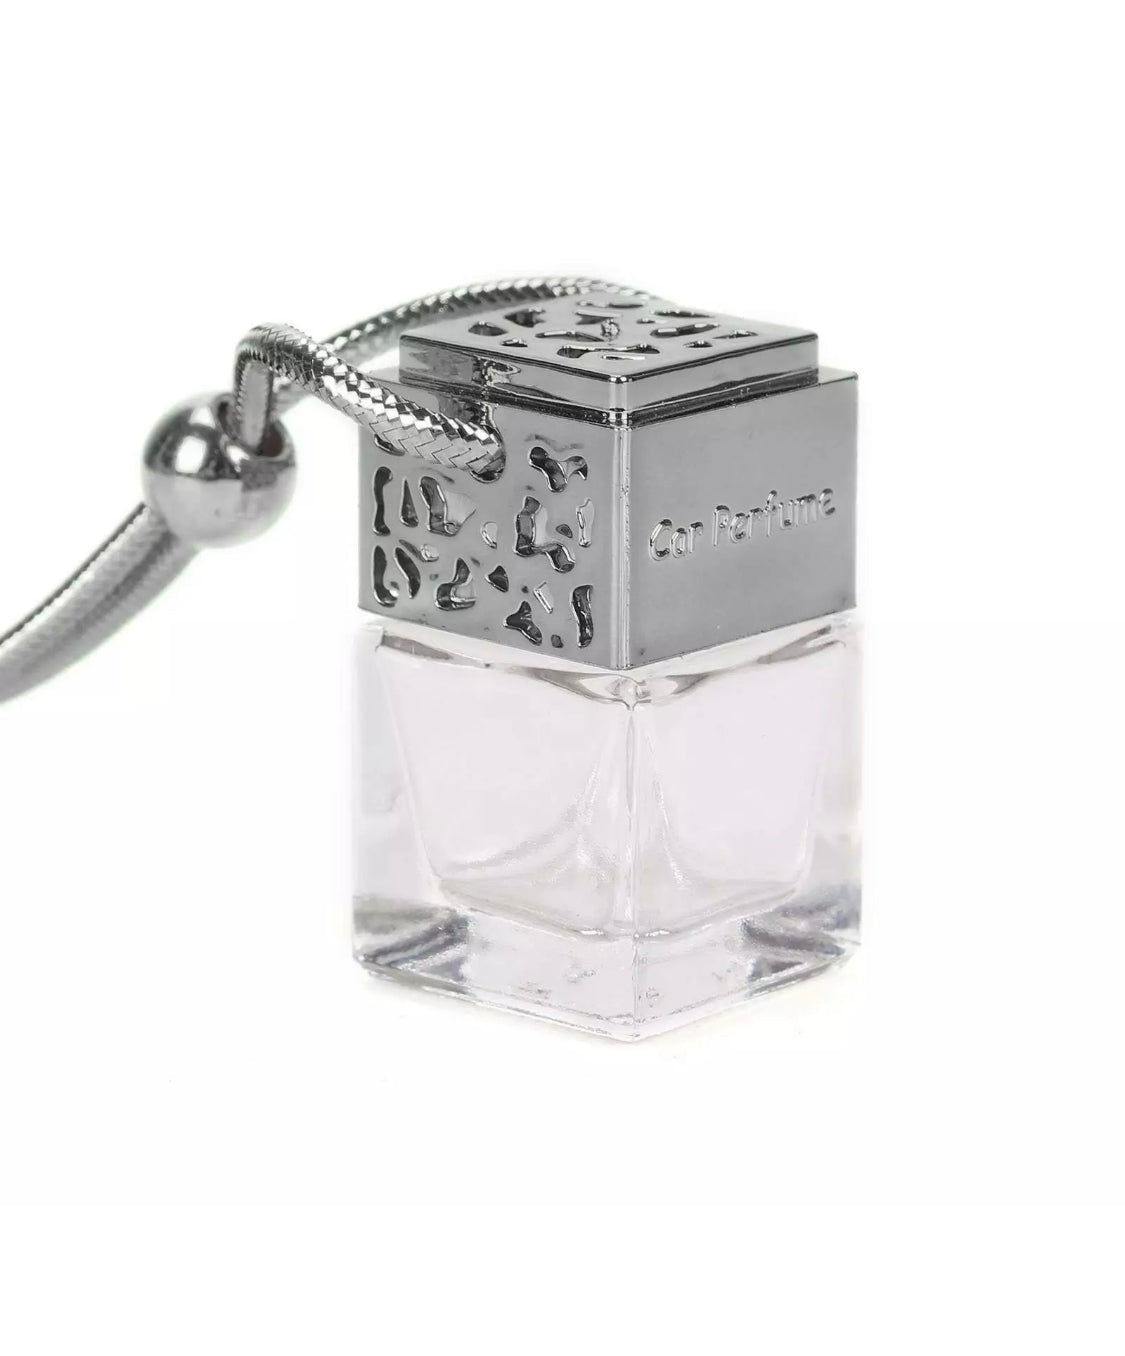 PARK LANE SILVER DESIGNER CAR DIFFUSER 8ml - BRAND NEW PRODUCT LIMITED EDITION